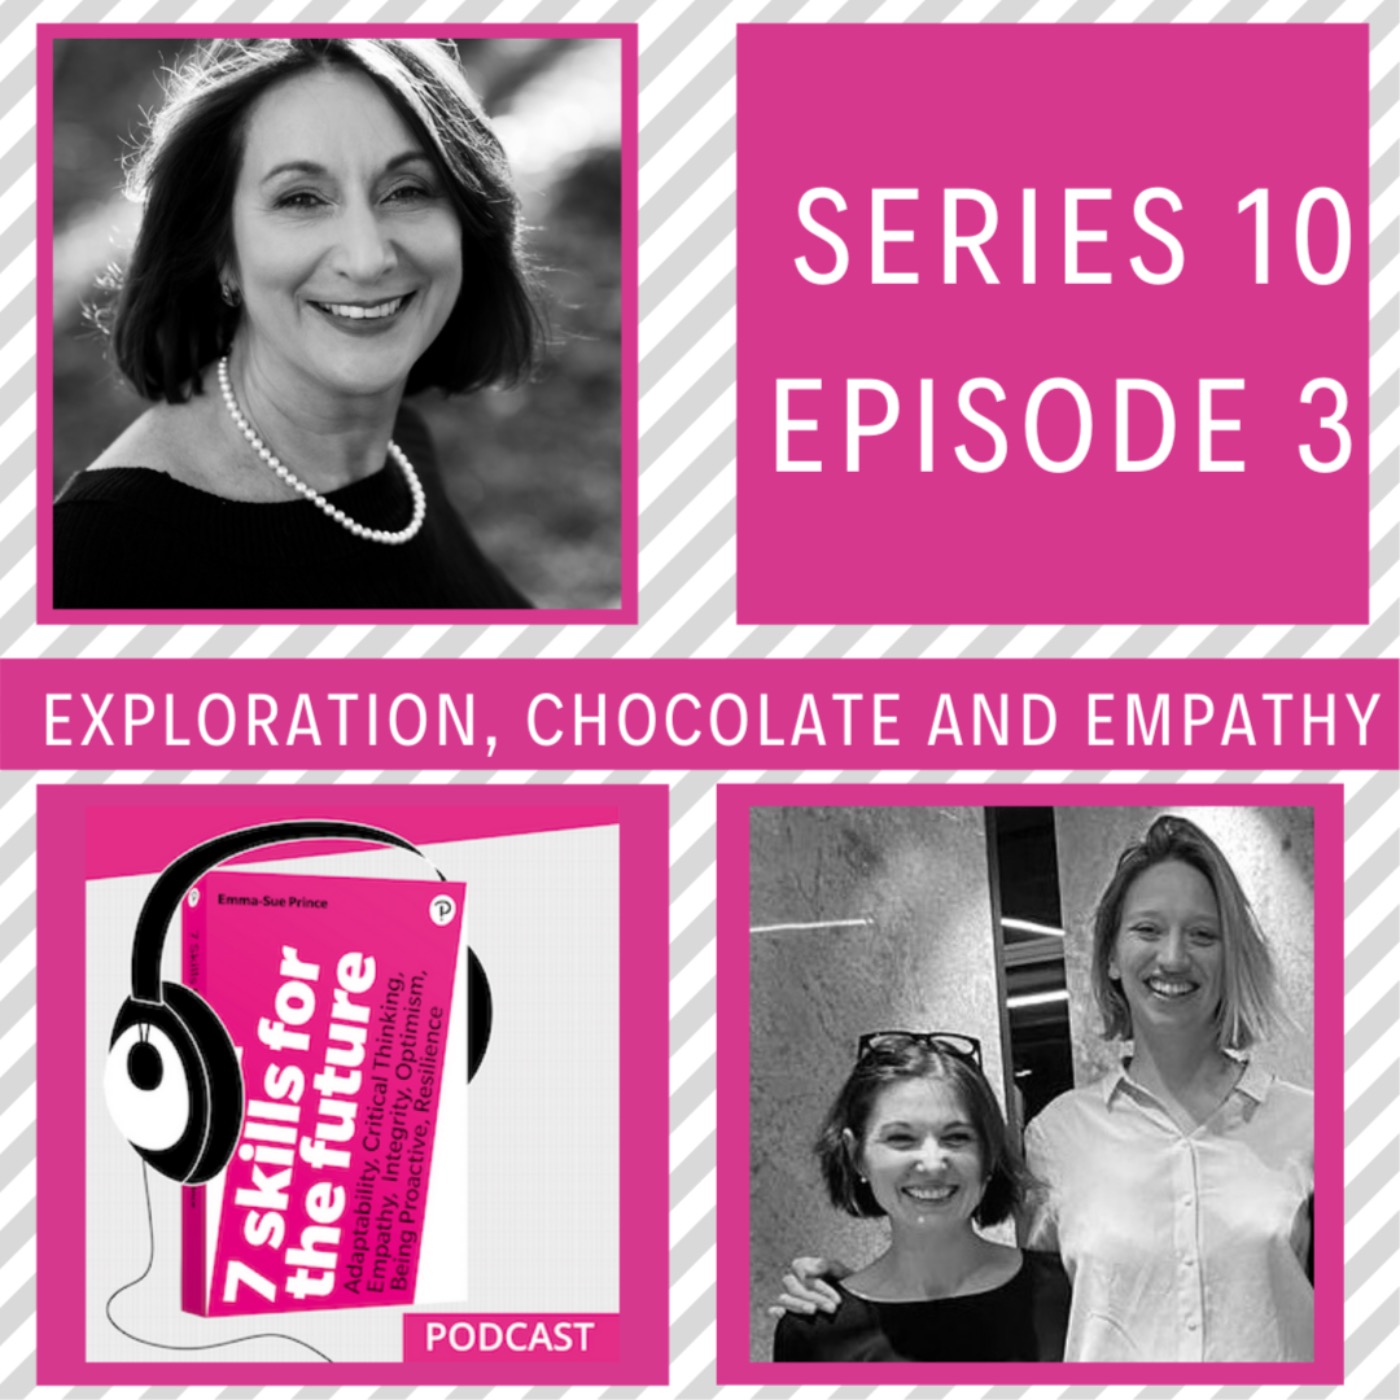 Exploration, Chocolate and Empathy